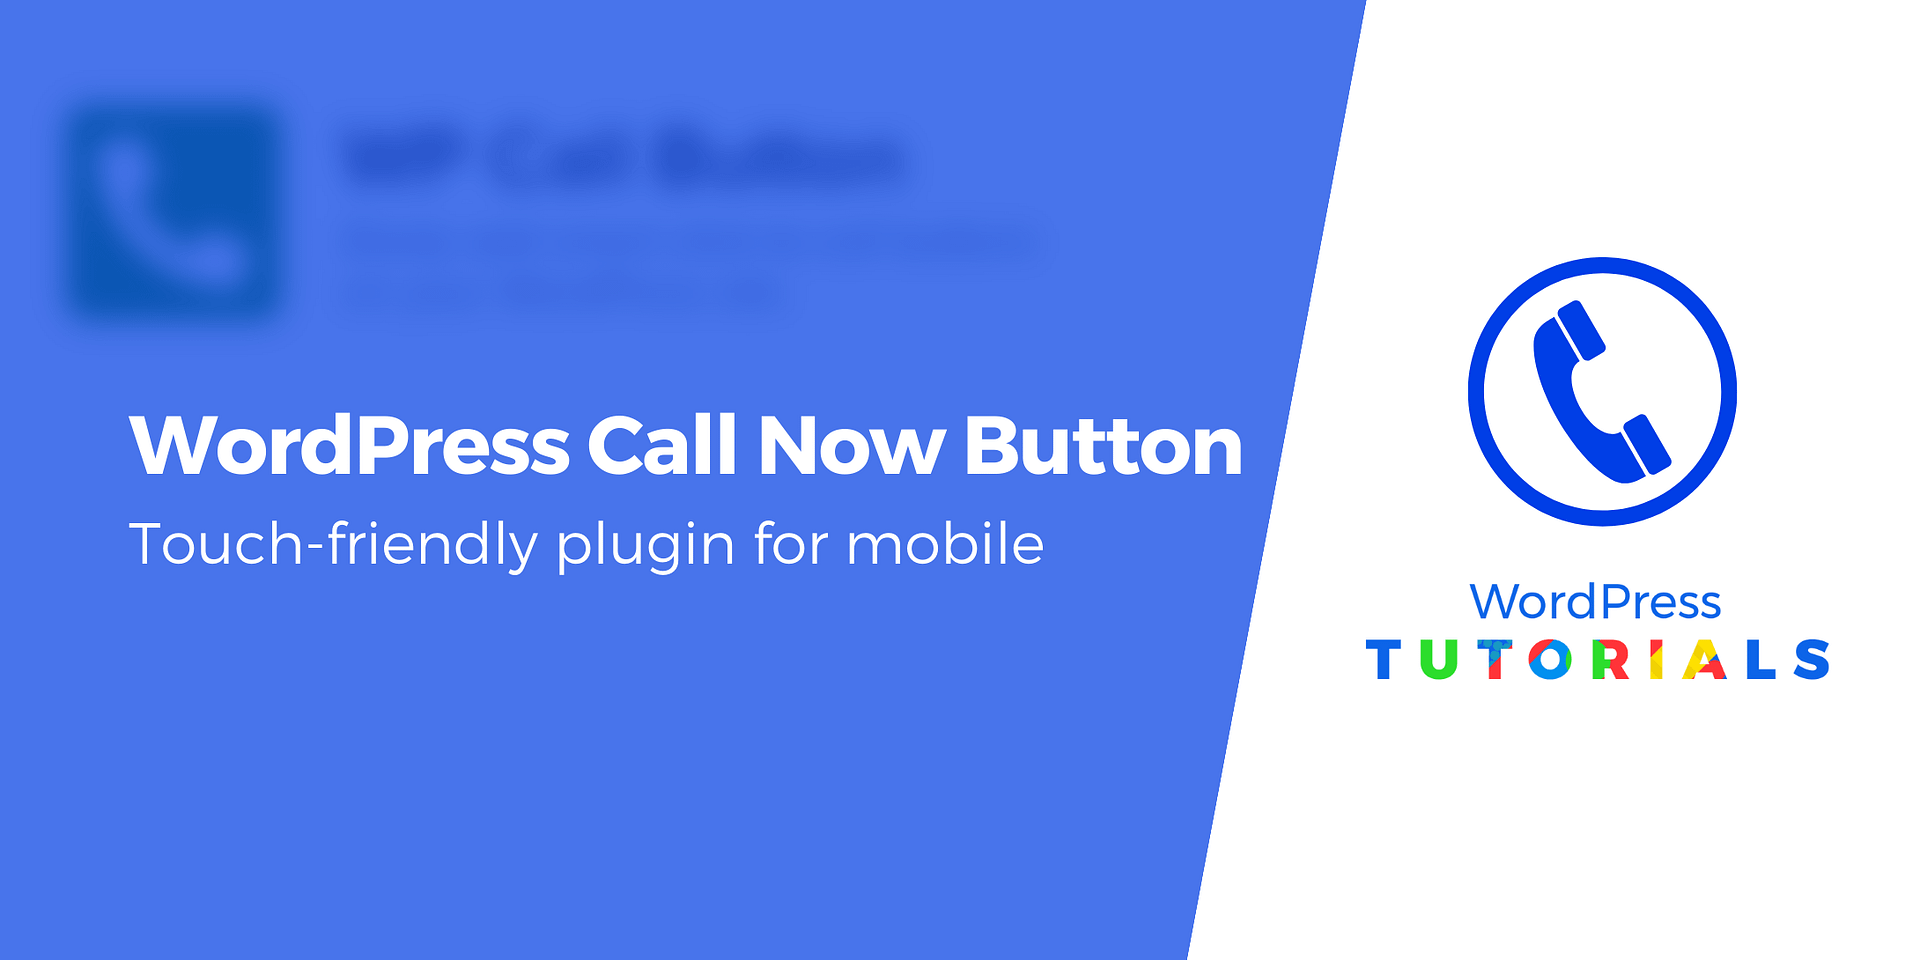 Rectangle greedy unpaid How to Add a Call Now Button to WordPress That's Touch-Friendly